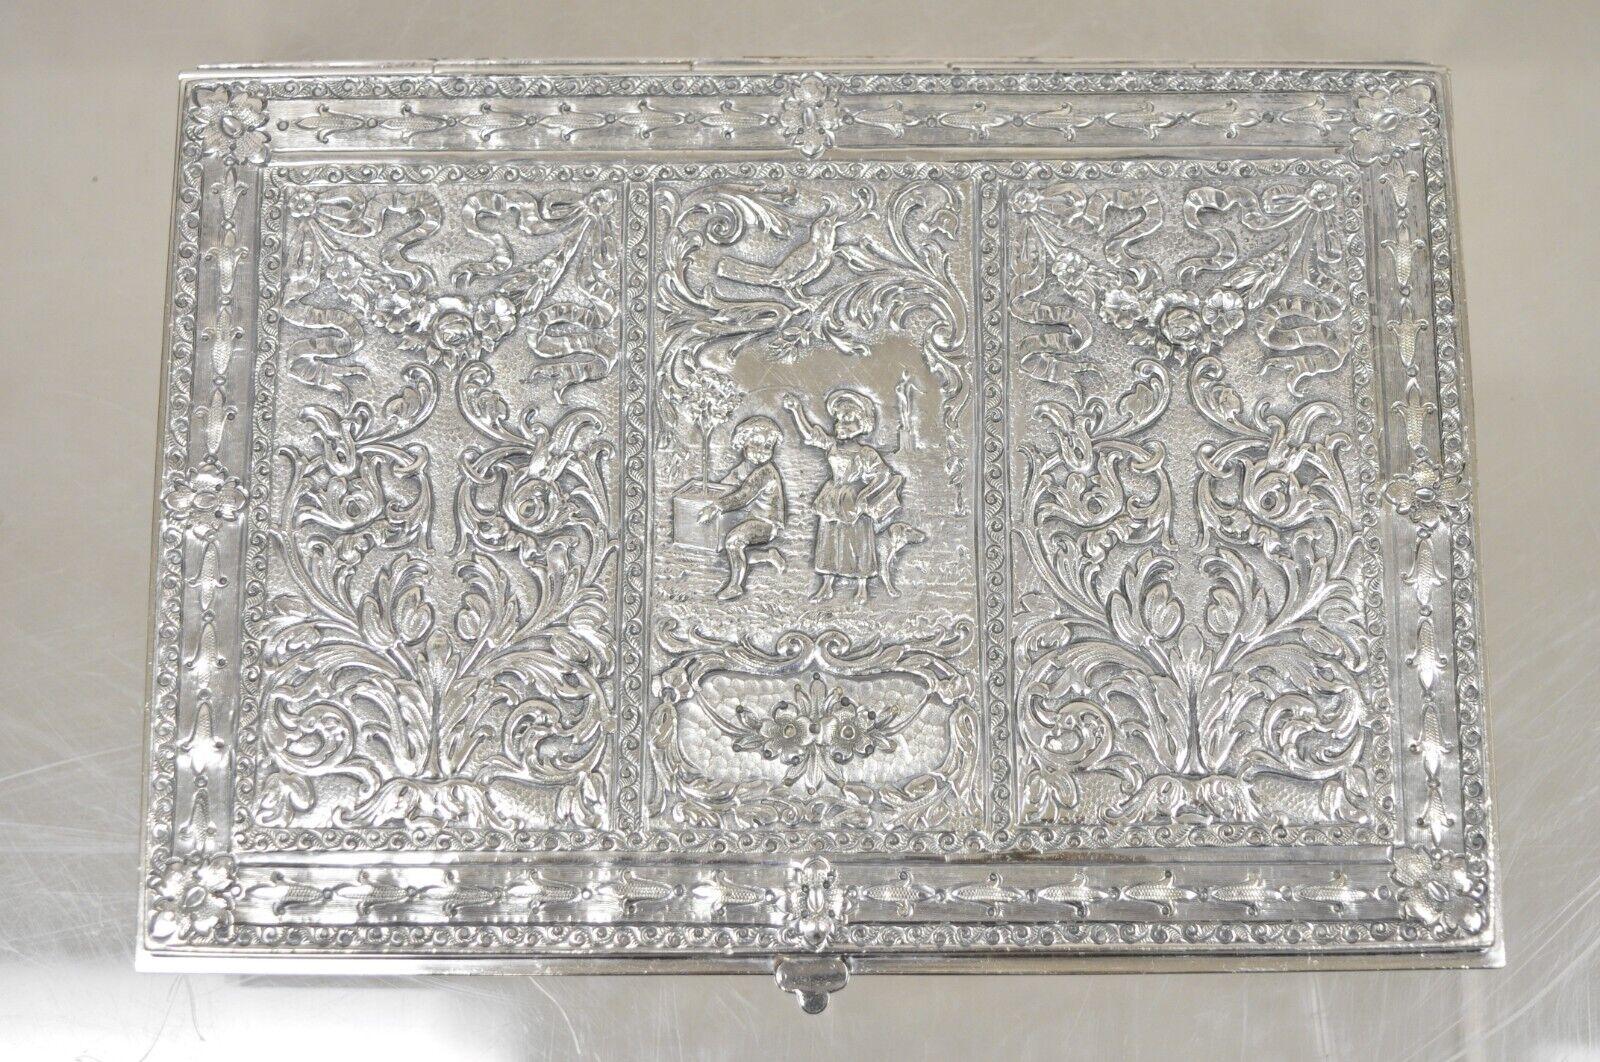 Vintage Dutch Country French Baroque Style Silver Plated Figural Jewelry Box. Circa Early 1900s. Mesures :  1,5